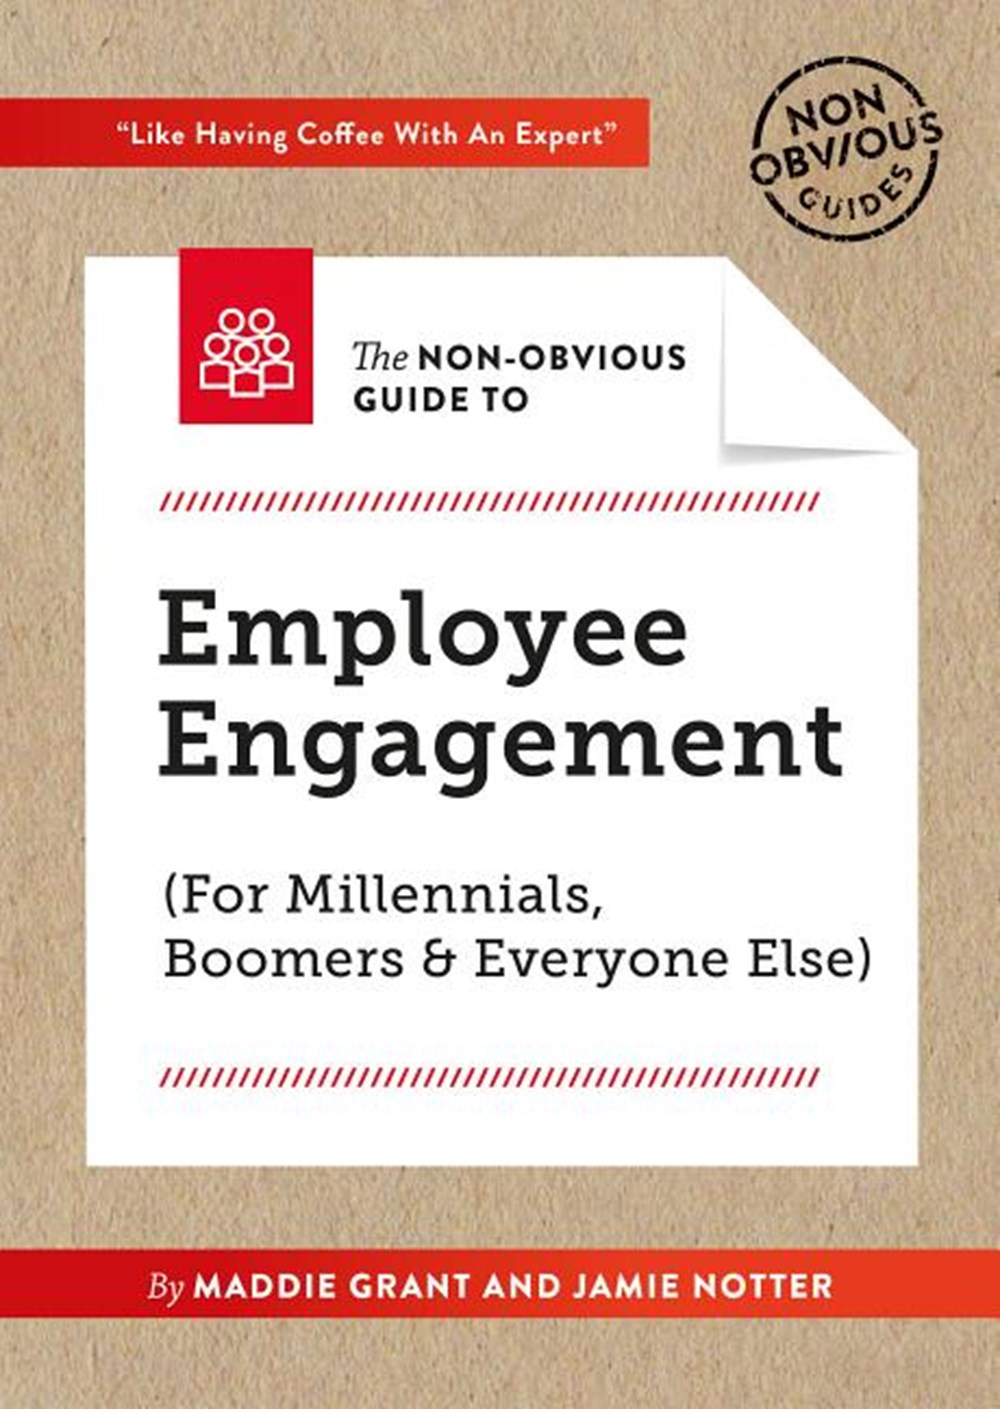 Non-Obvious Guide to Employee Engagement (for Millennials, Boomers and Everyone Else)